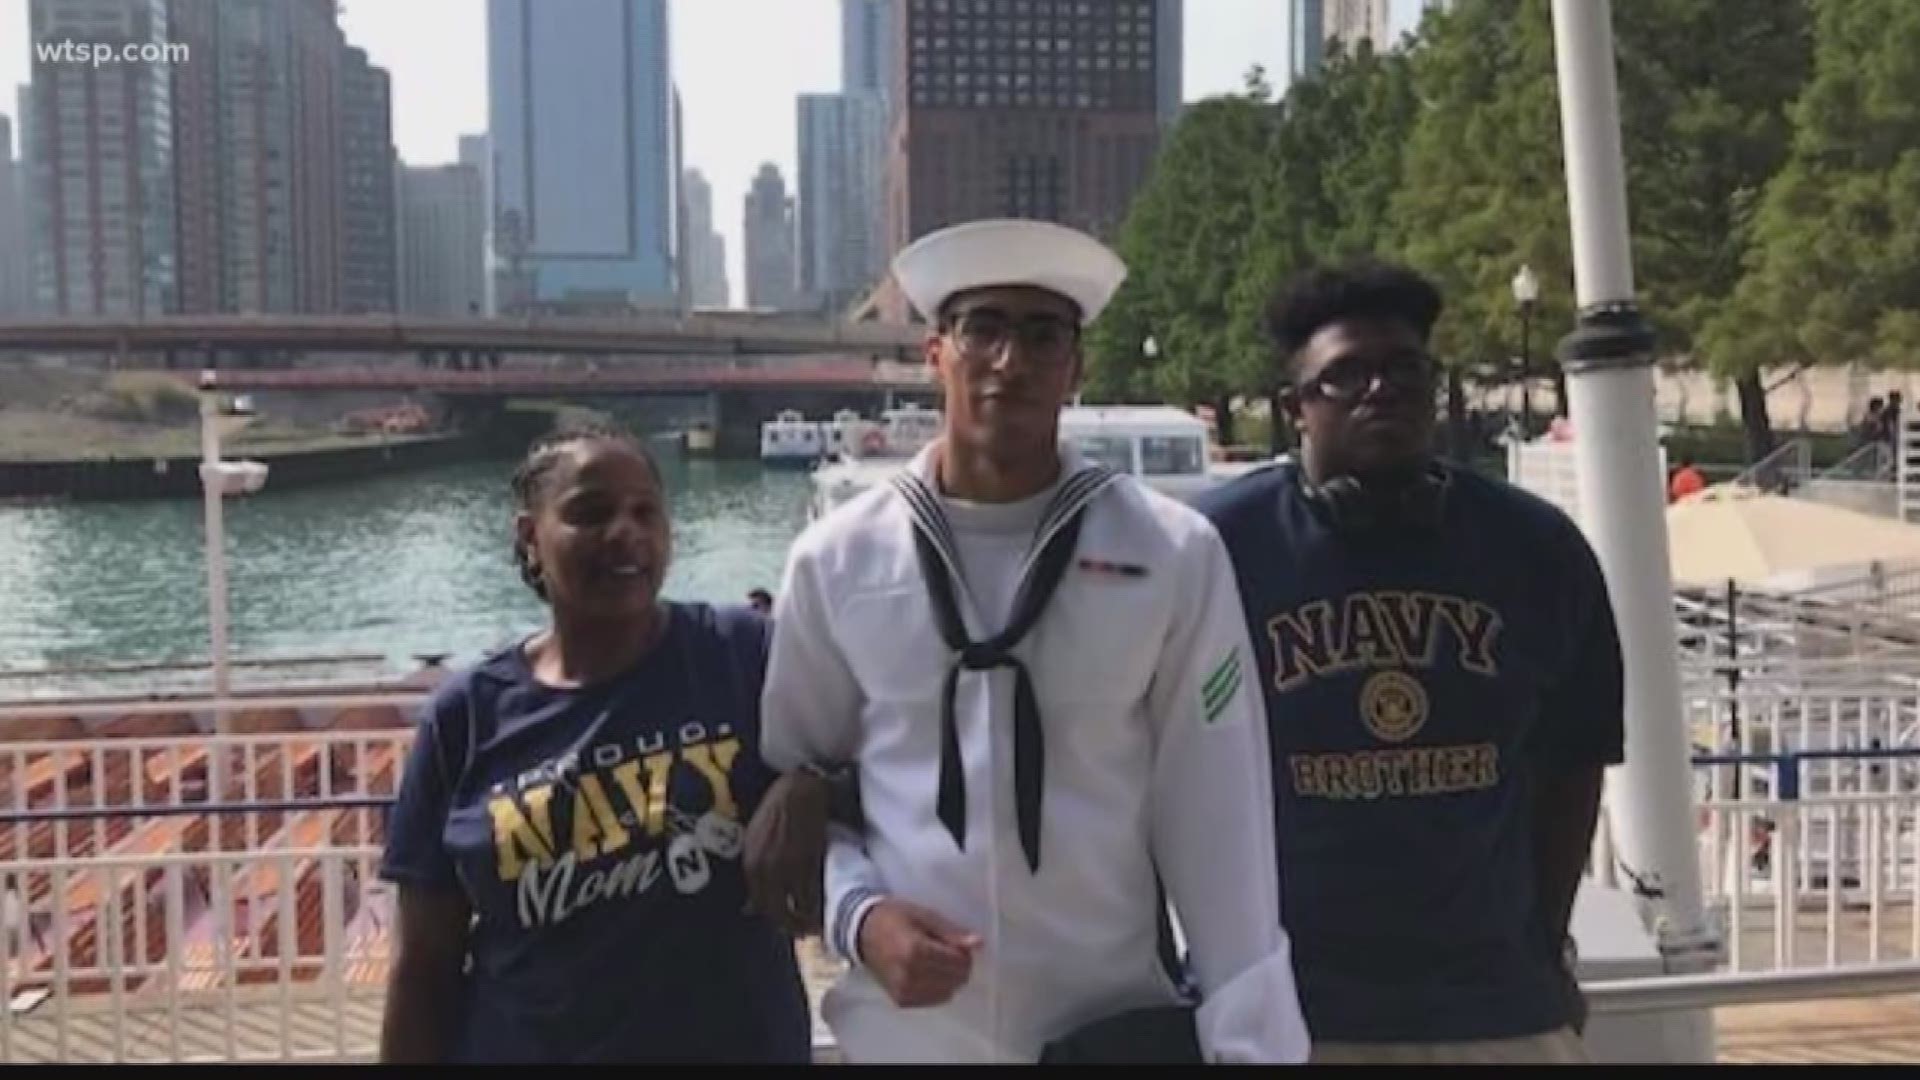 Mohammed Haitham graduated in 2018. He followed his mother’s footsteps and joined the U.S. Navy soon after.